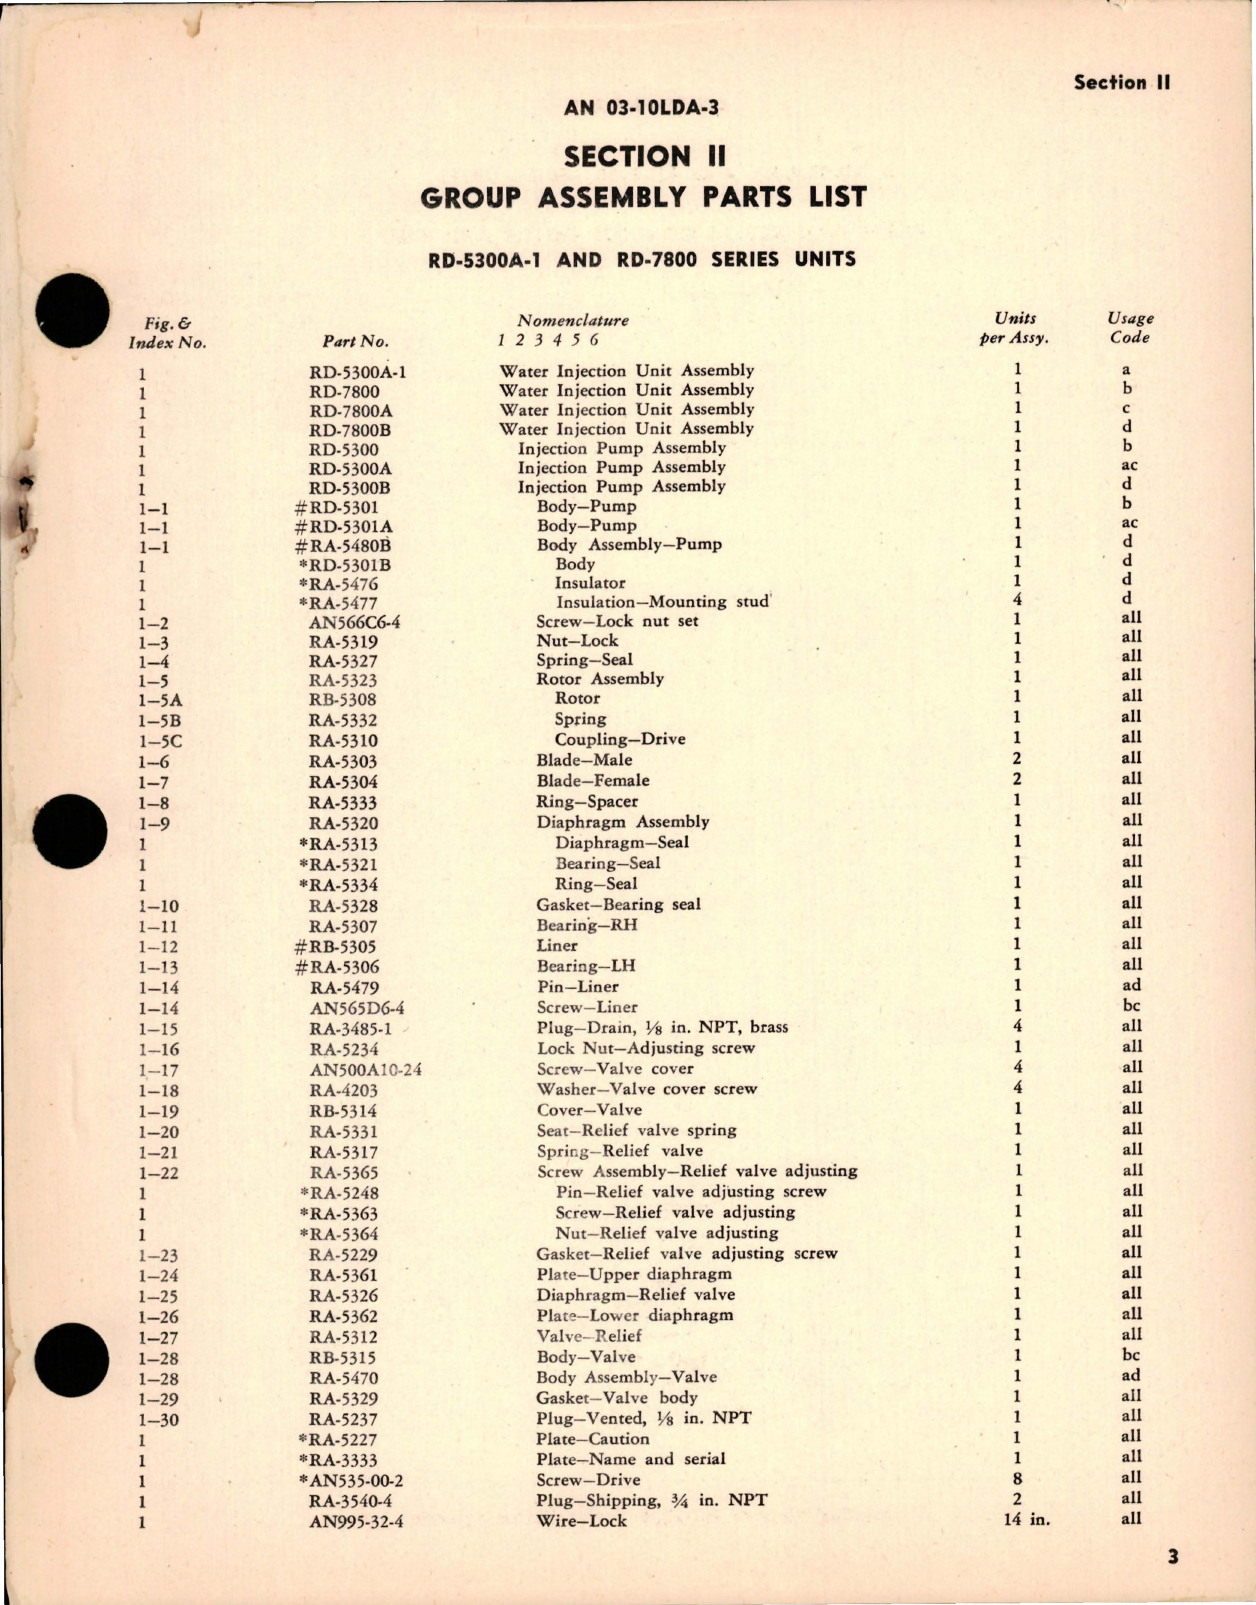 Sample page 5 from AirCorps Library document: Parts Catalog for Line Type Water Injection Units